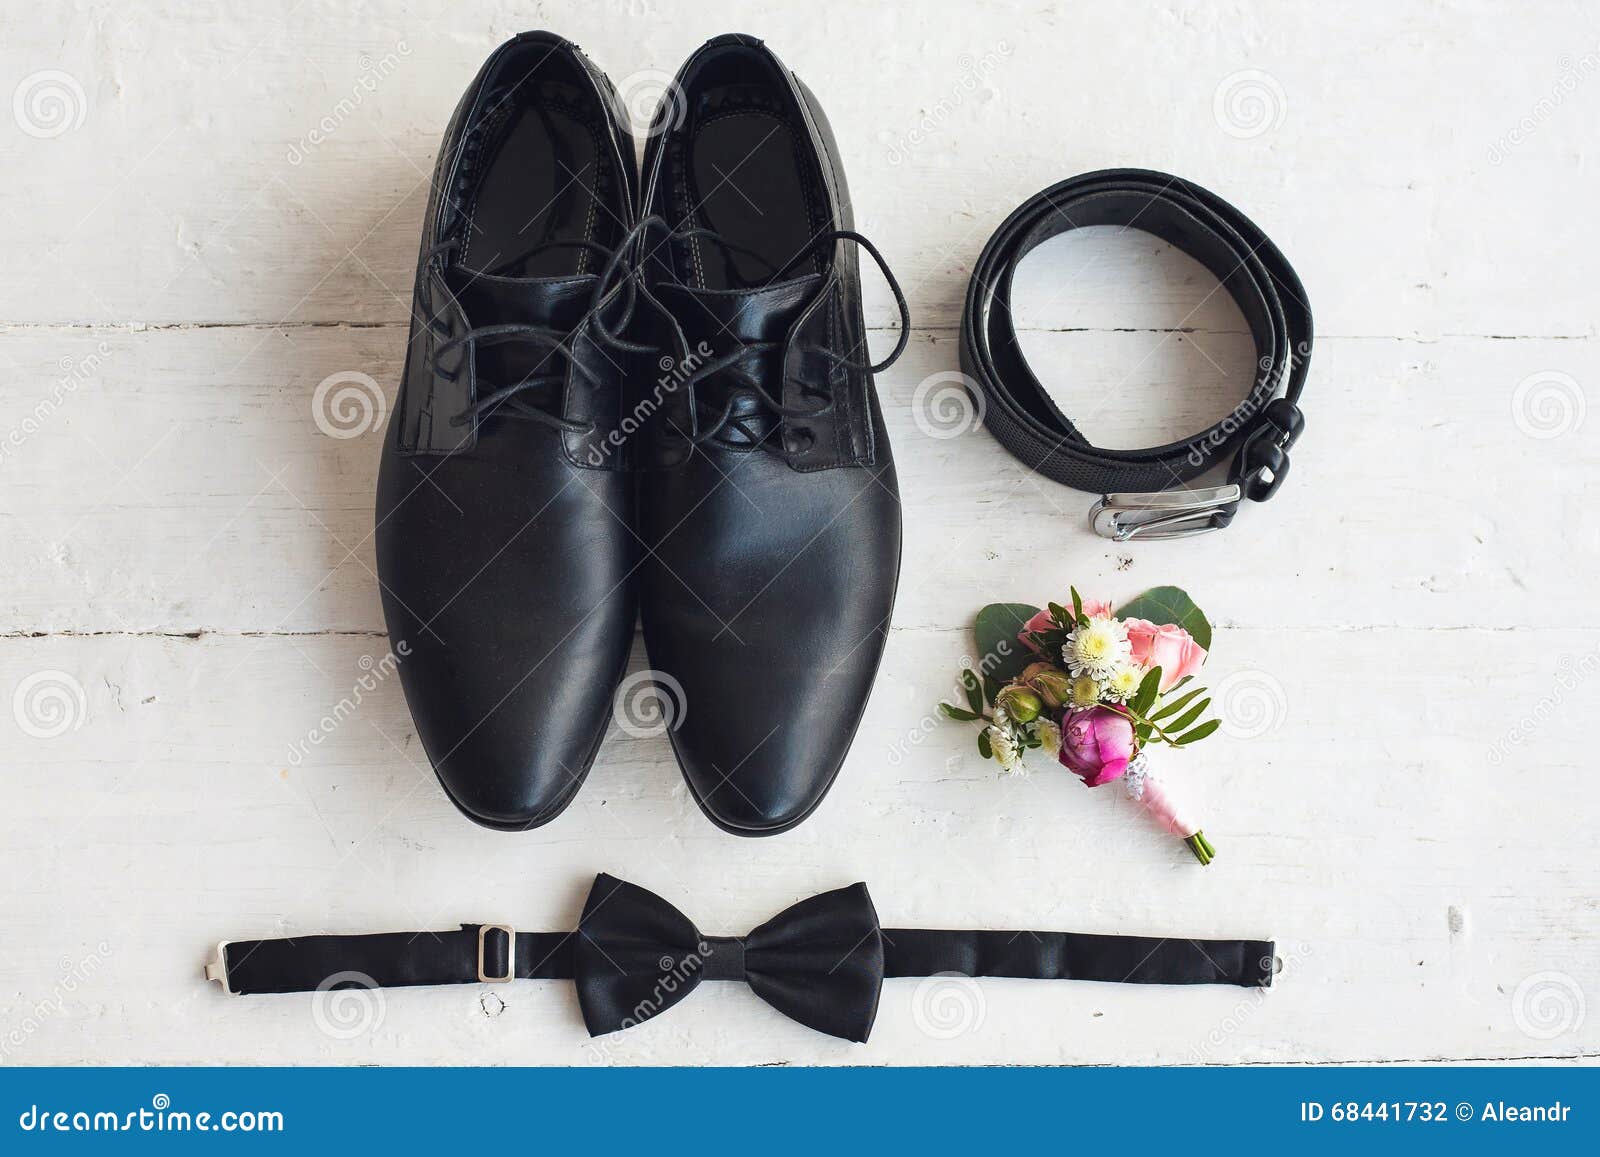 https://thumbs.dreamstime.com/z/close-up-modern-man-accessories-black-bowtie-leather-shoes-belt-flower-boutonniere-white-wood-rustic-background-set-68441732.jpg